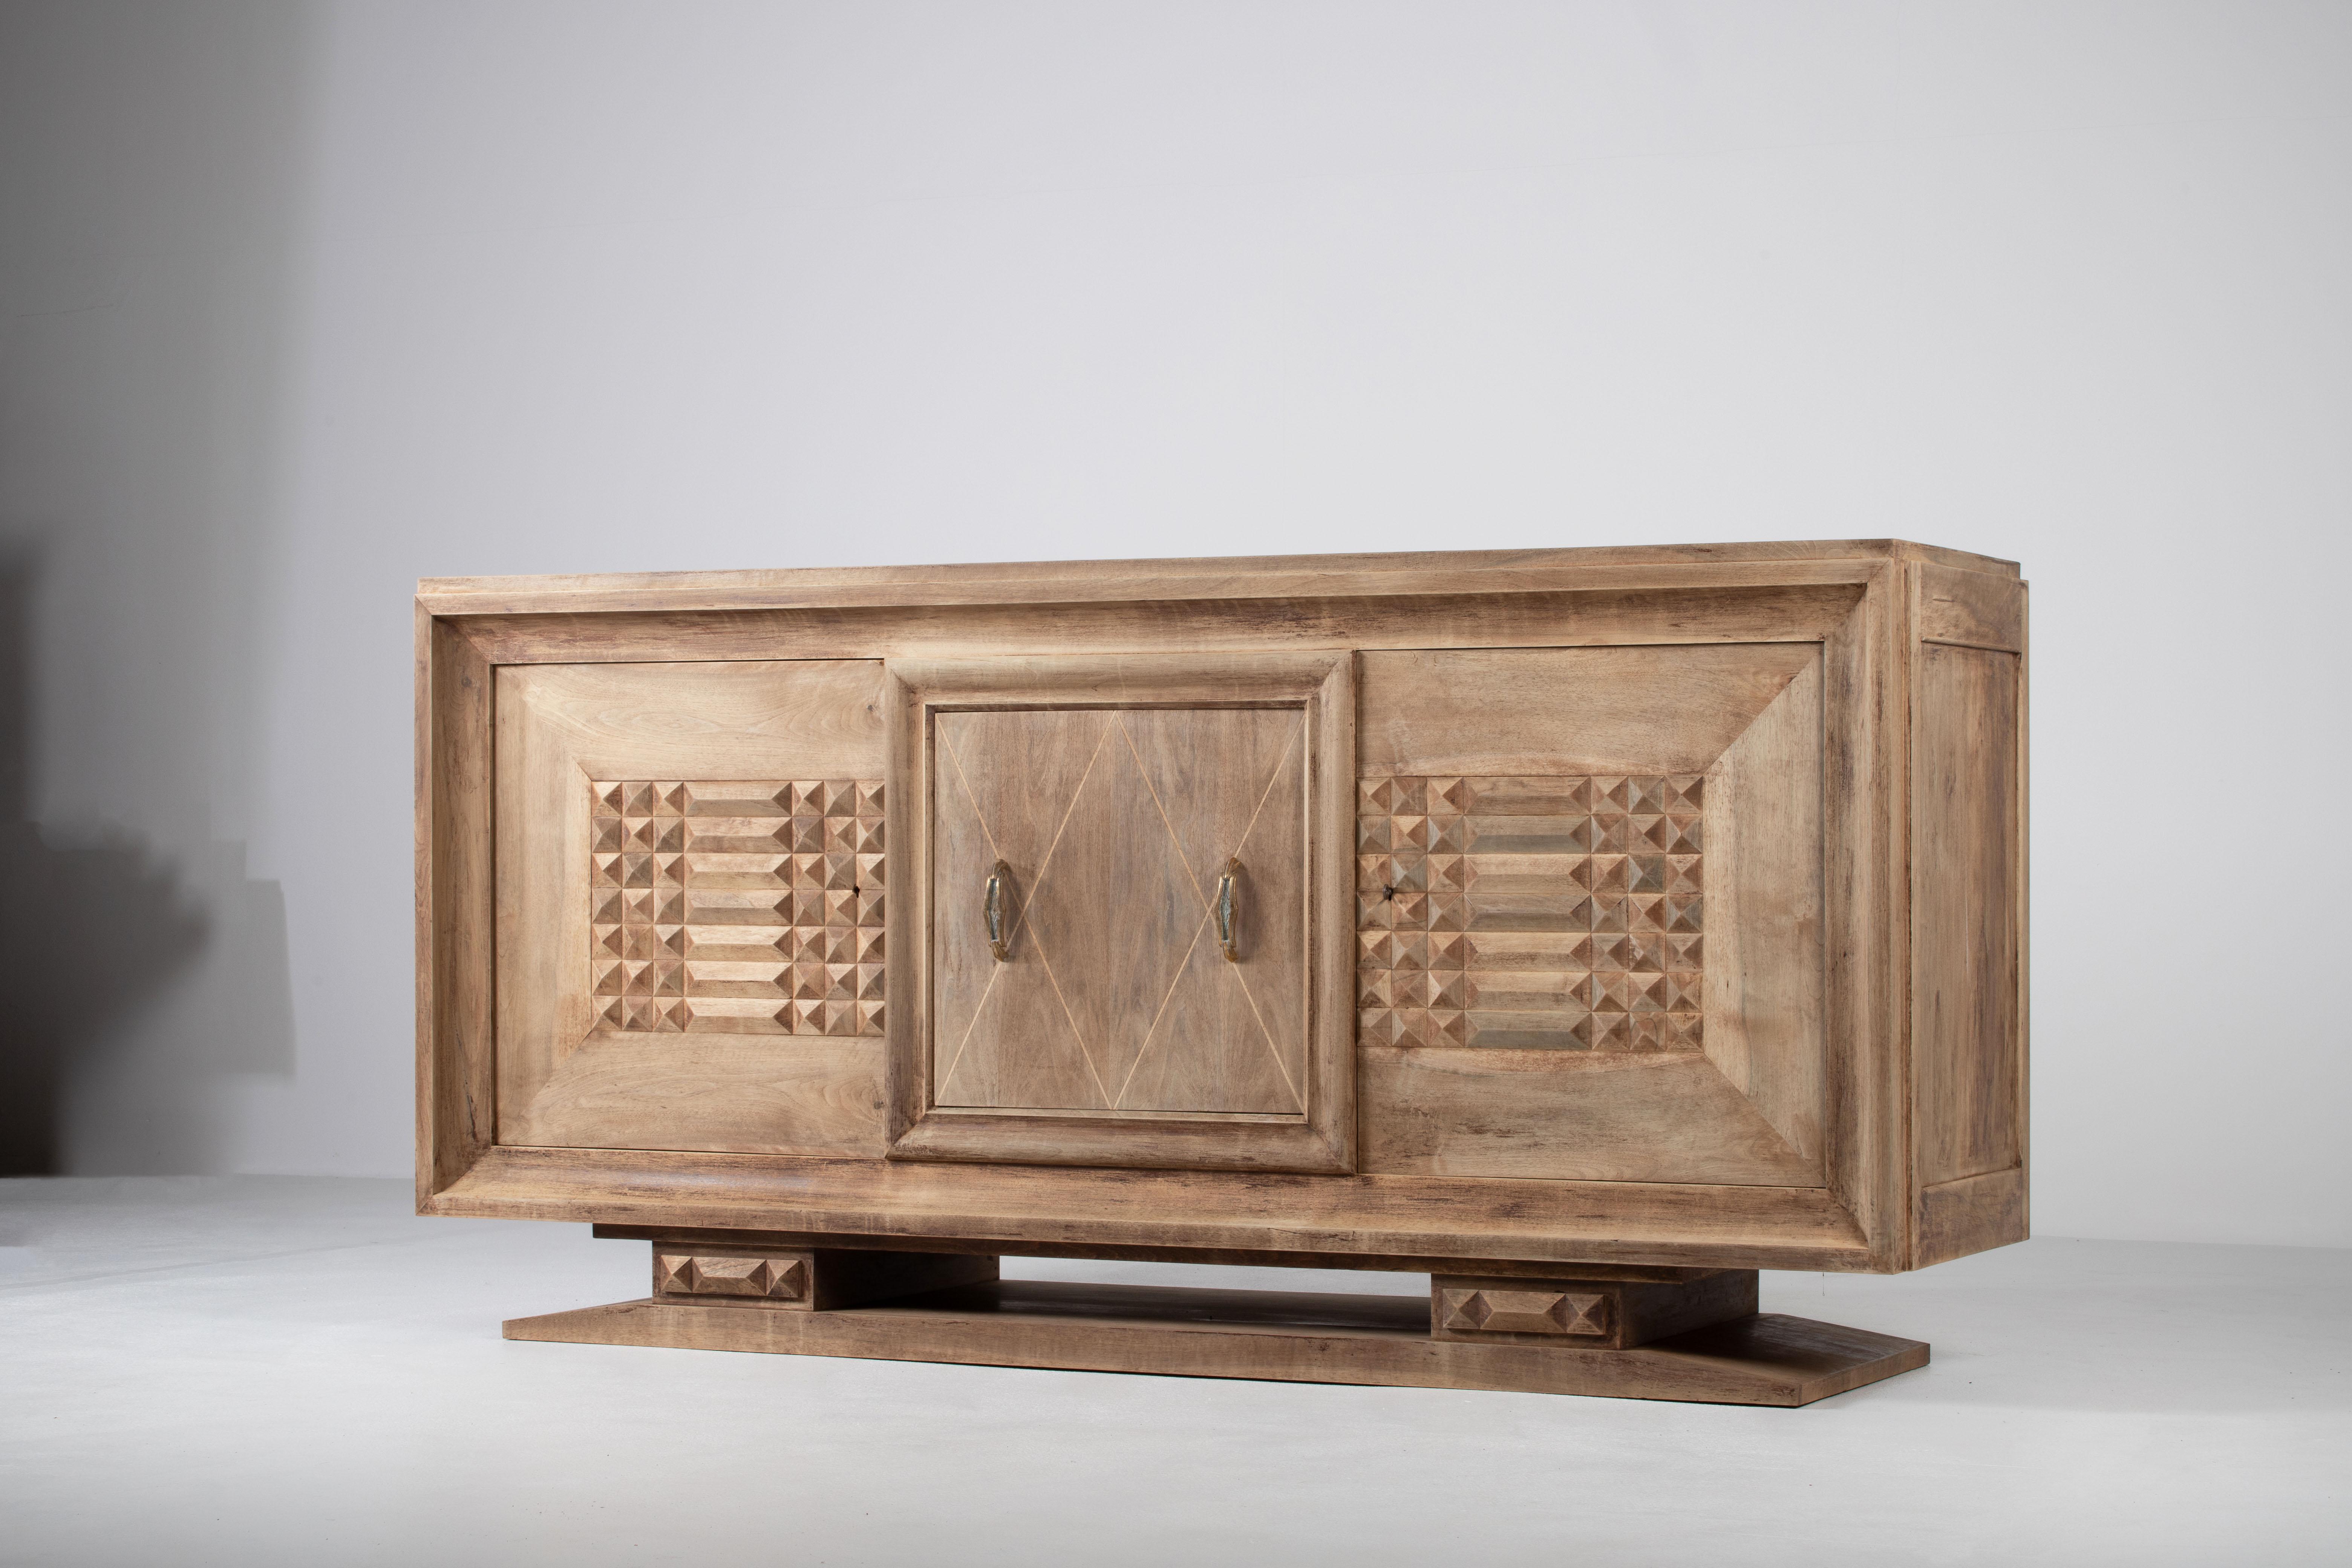 Bleached Art Deco Solid Oak Sideboard with Geometric Details, France, 1940s For Sale 4